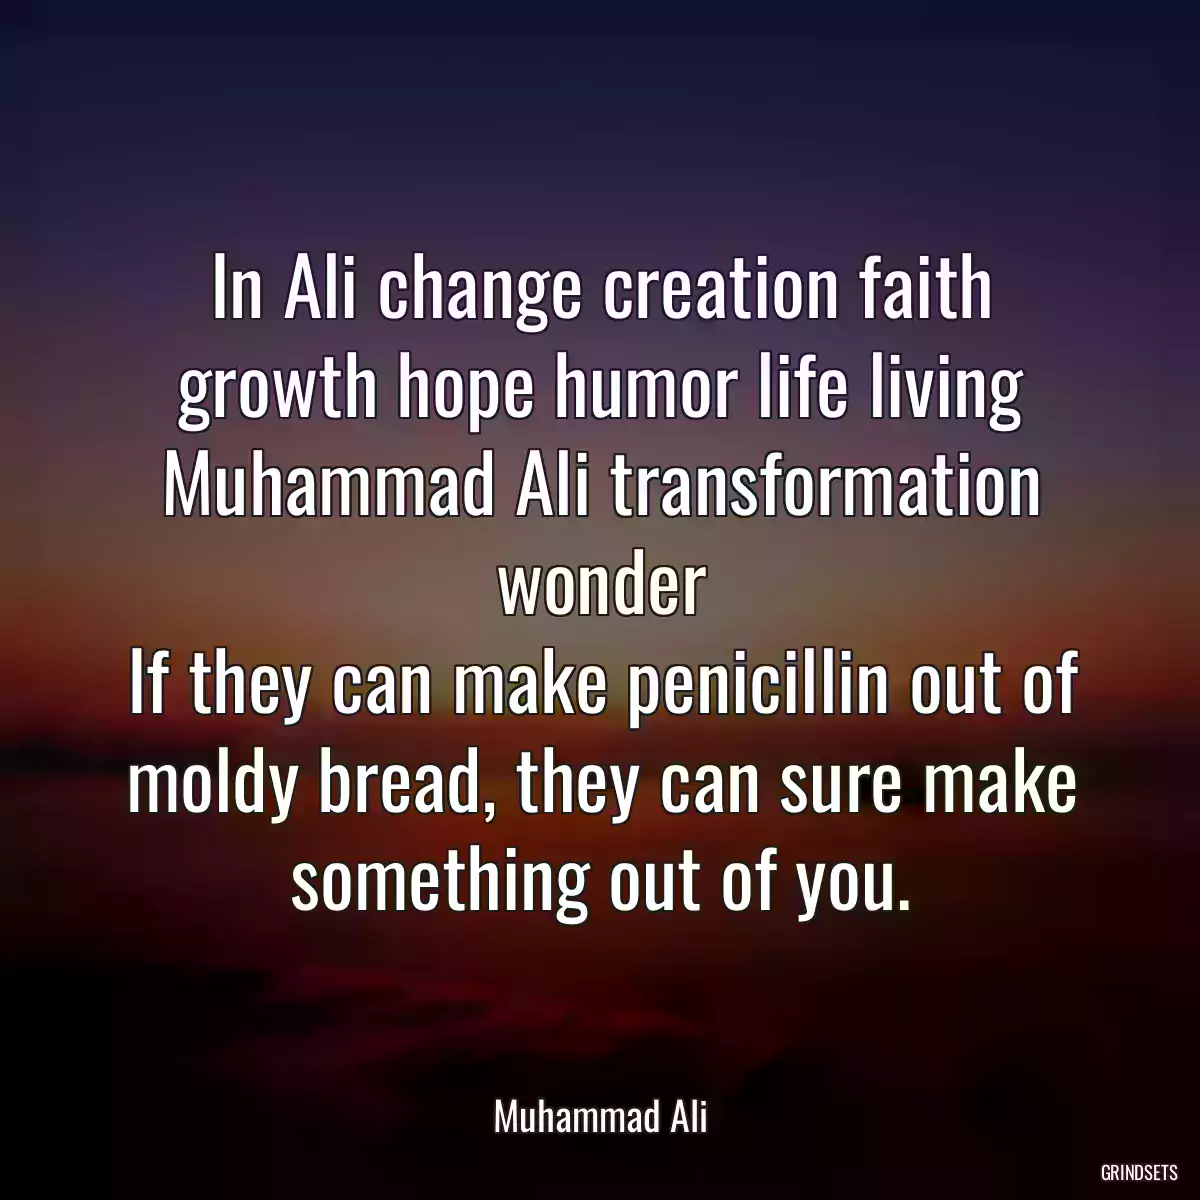 In Ali change creation faith growth hope humor life living Muhammad Ali transformation wonder
If they can make penicillin out of moldy bread, they can sure make something out of you.